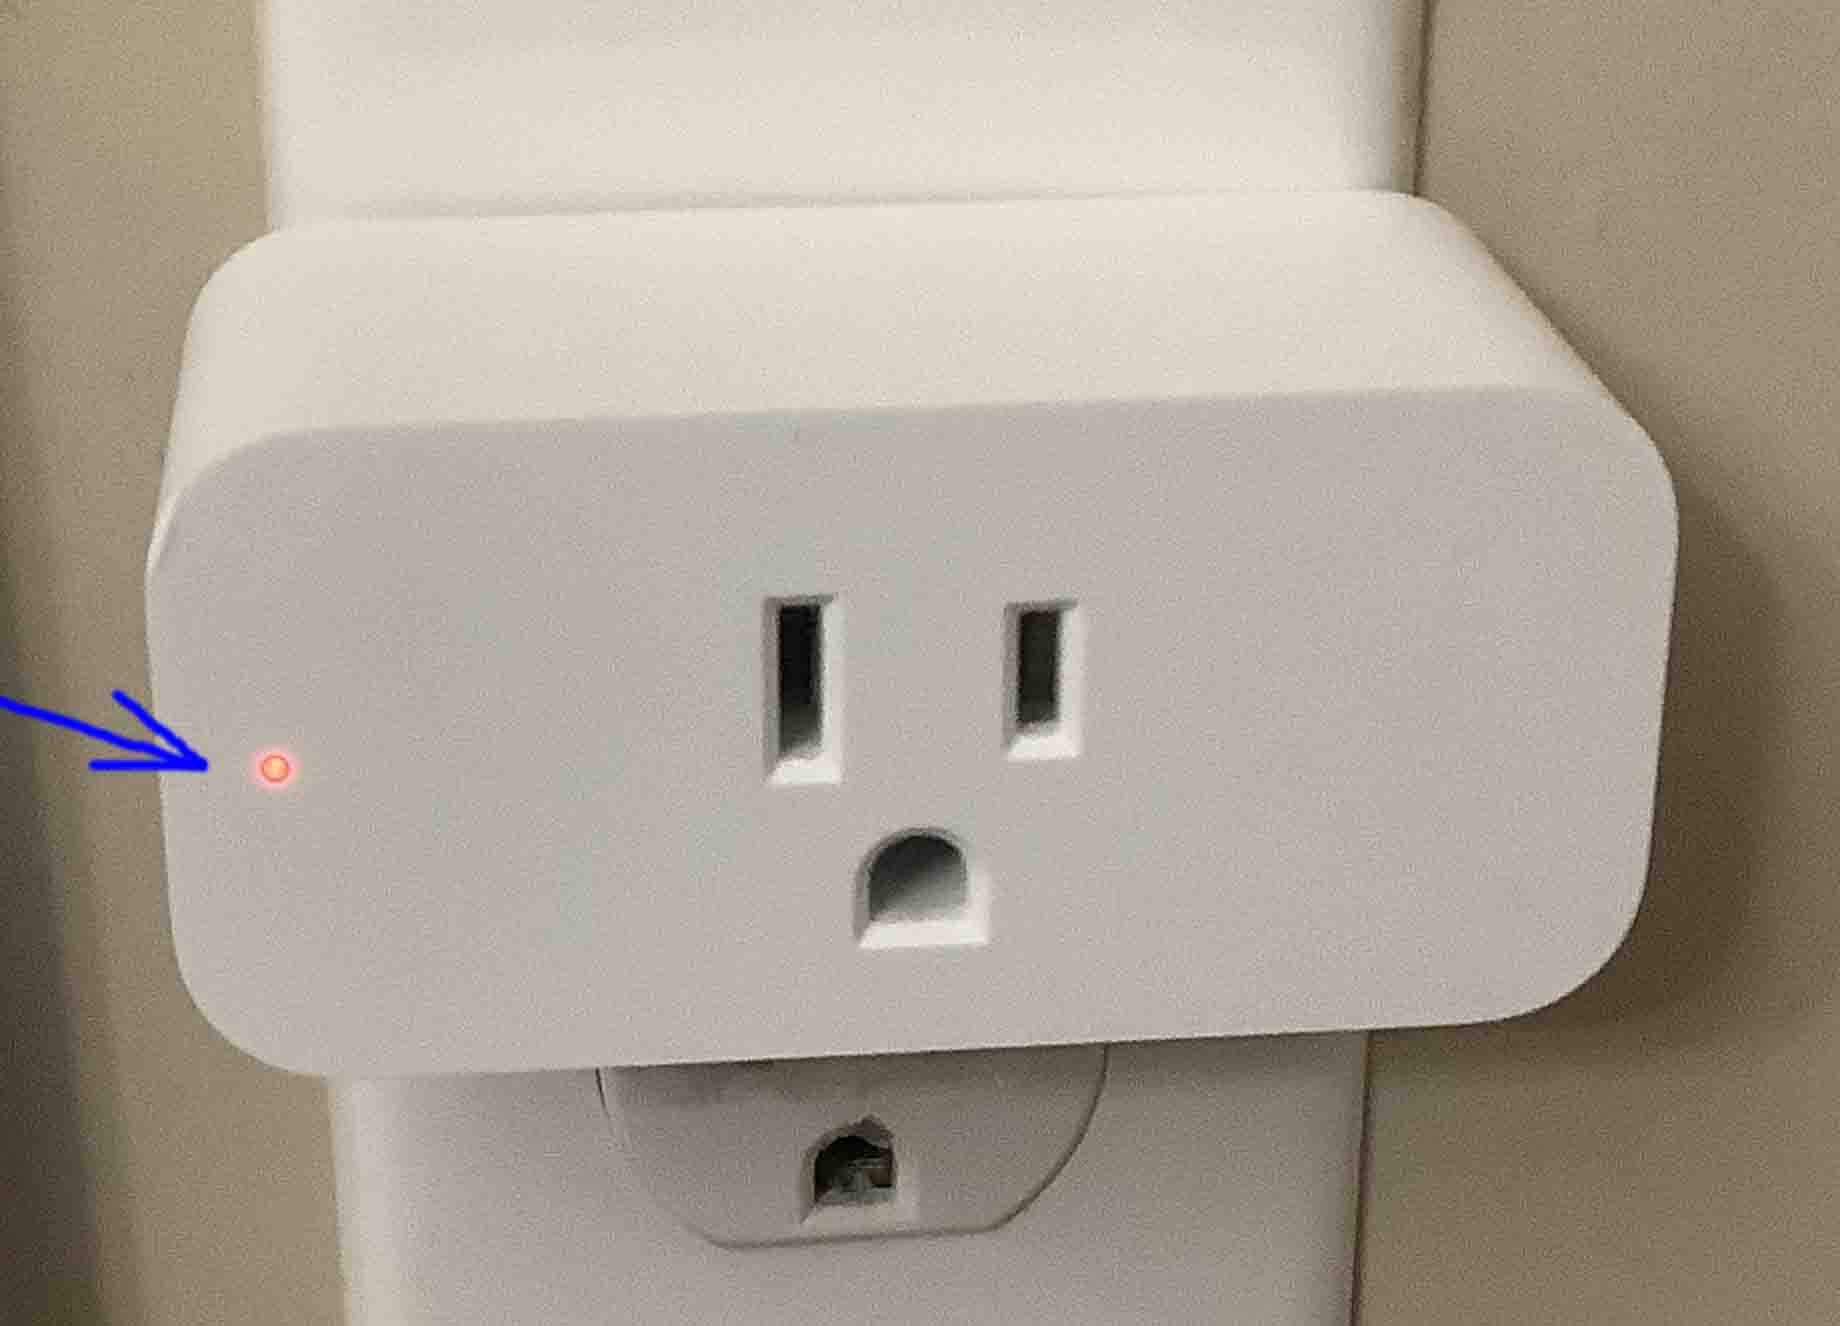 https://storables.com/wp-content/uploads/2023/12/why-is-my-smart-plug-blinking-red-1703551028.jpg